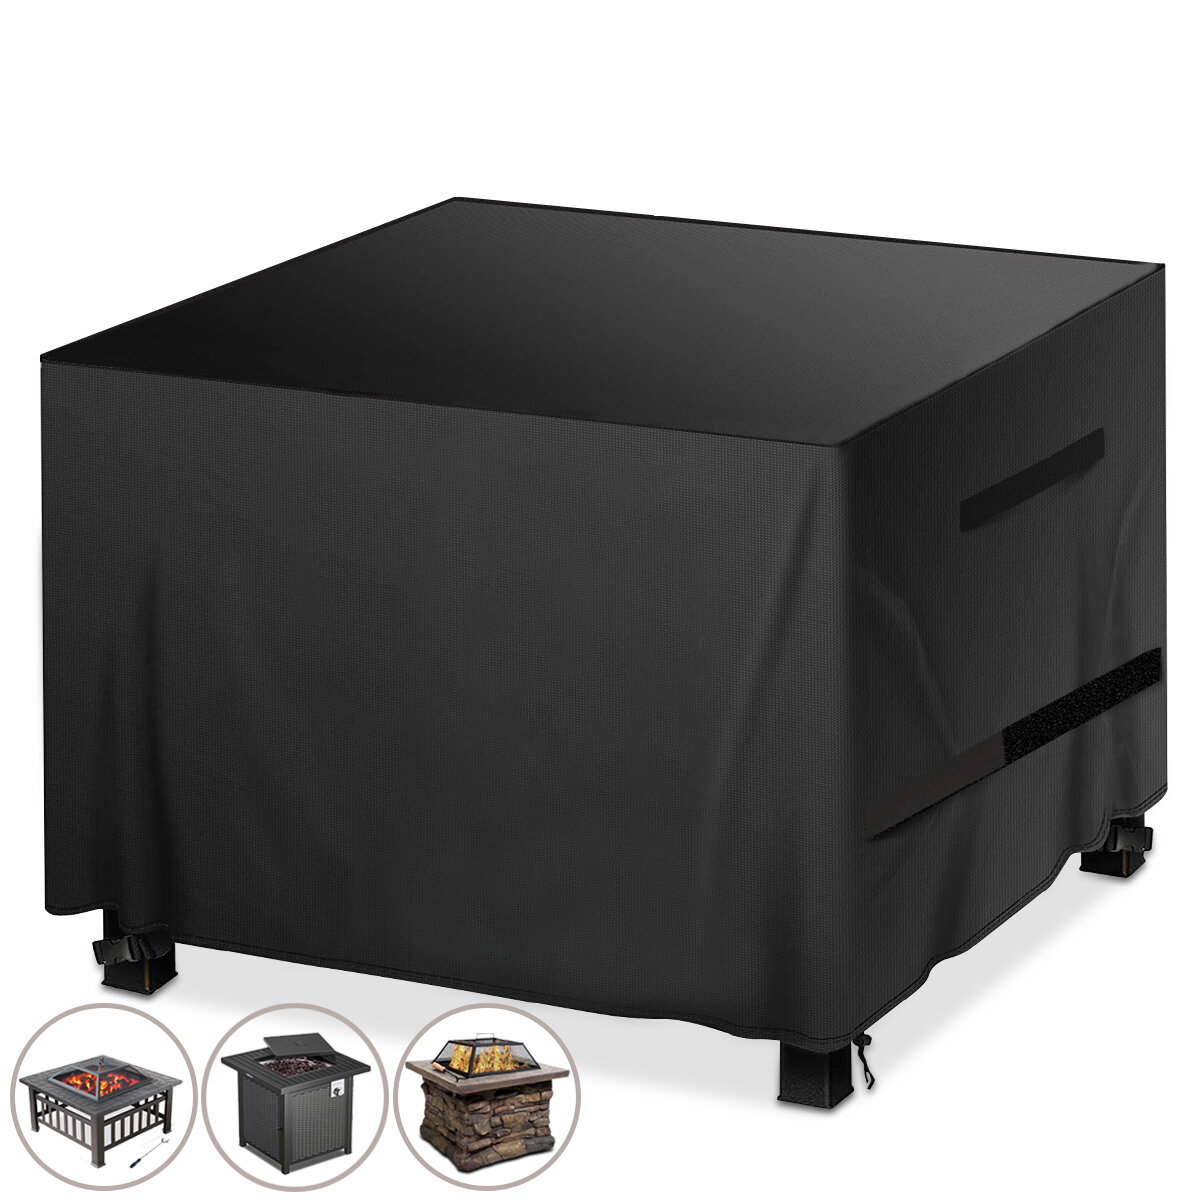 KING DO WAY BBQ Grill Cover Waterproof Drable Grill Protection Layer Dustproof Outdoor Camping Garden